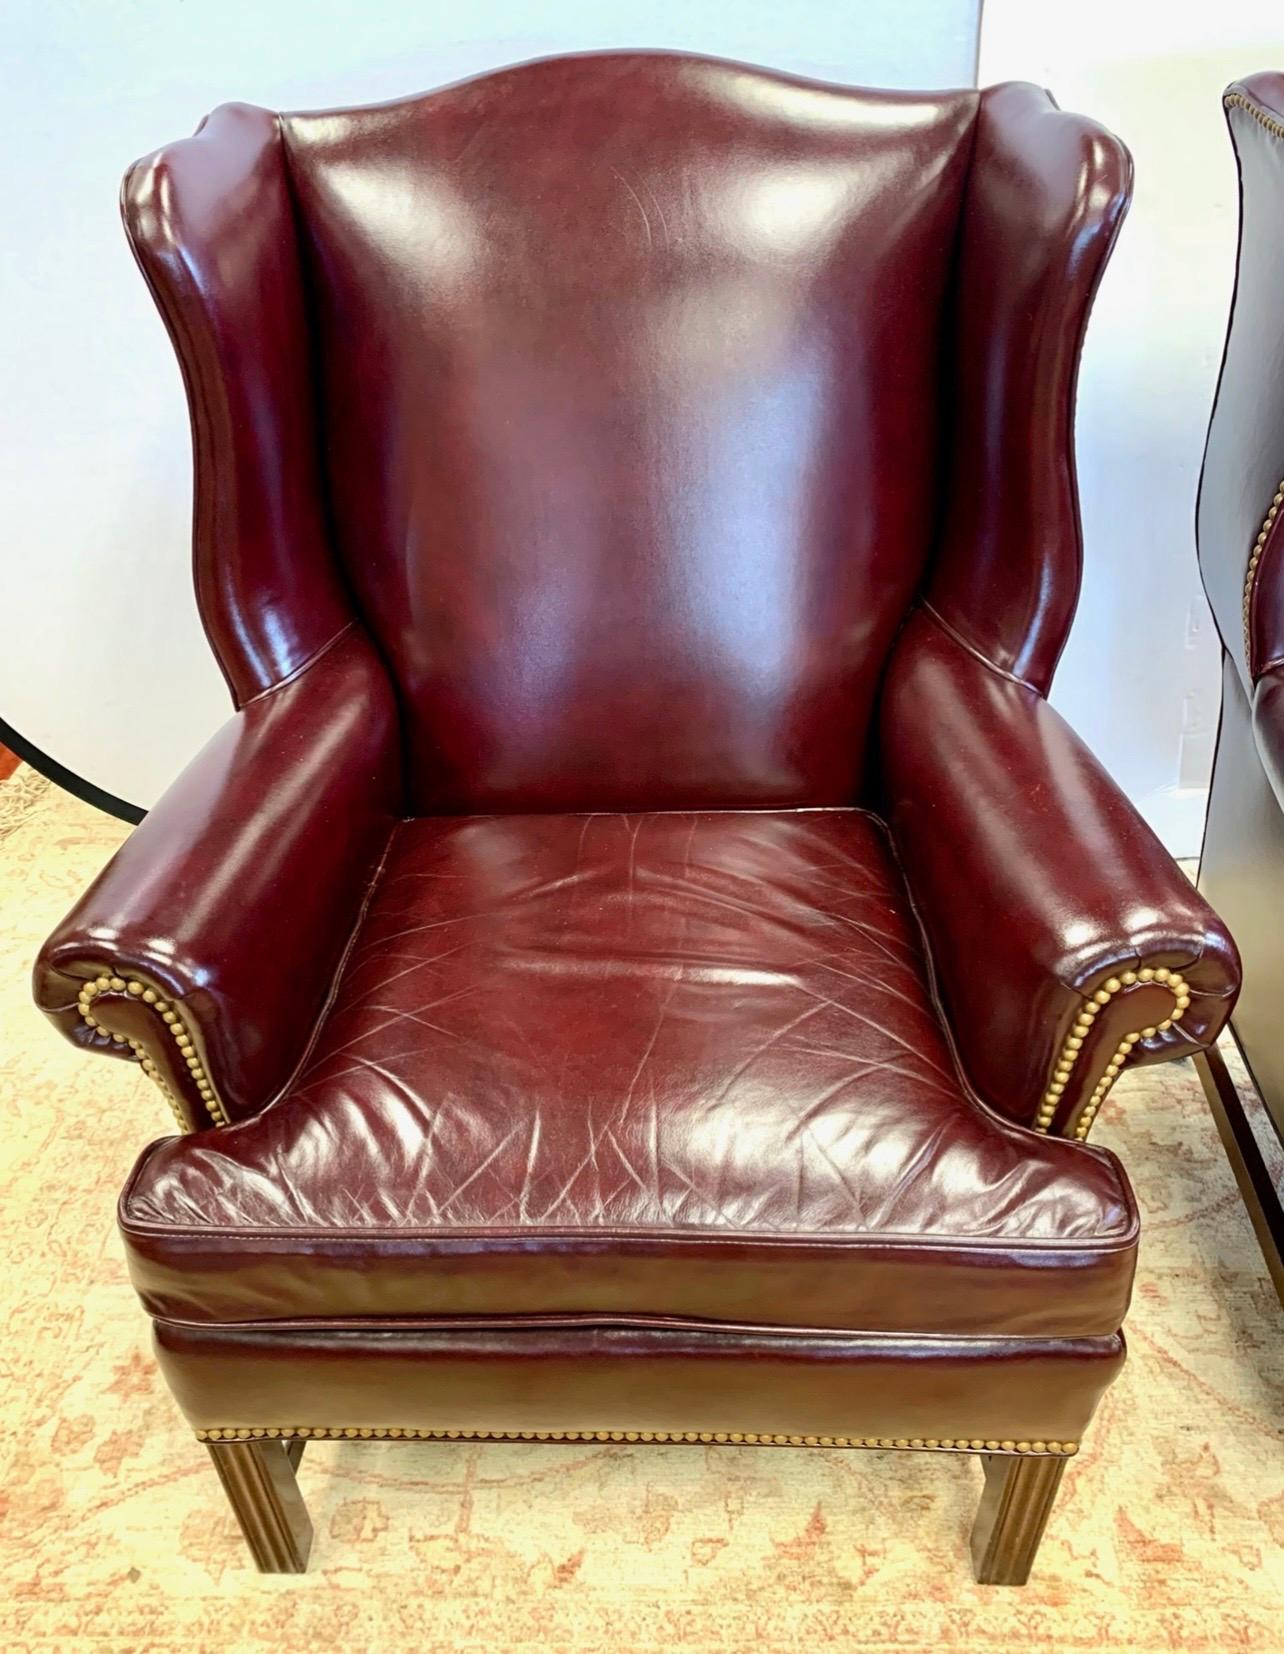 Magnificent signed Hancock & Moore leather wingback chair adorned on brass nailheads. Now, more than ever, home is where the heart is.